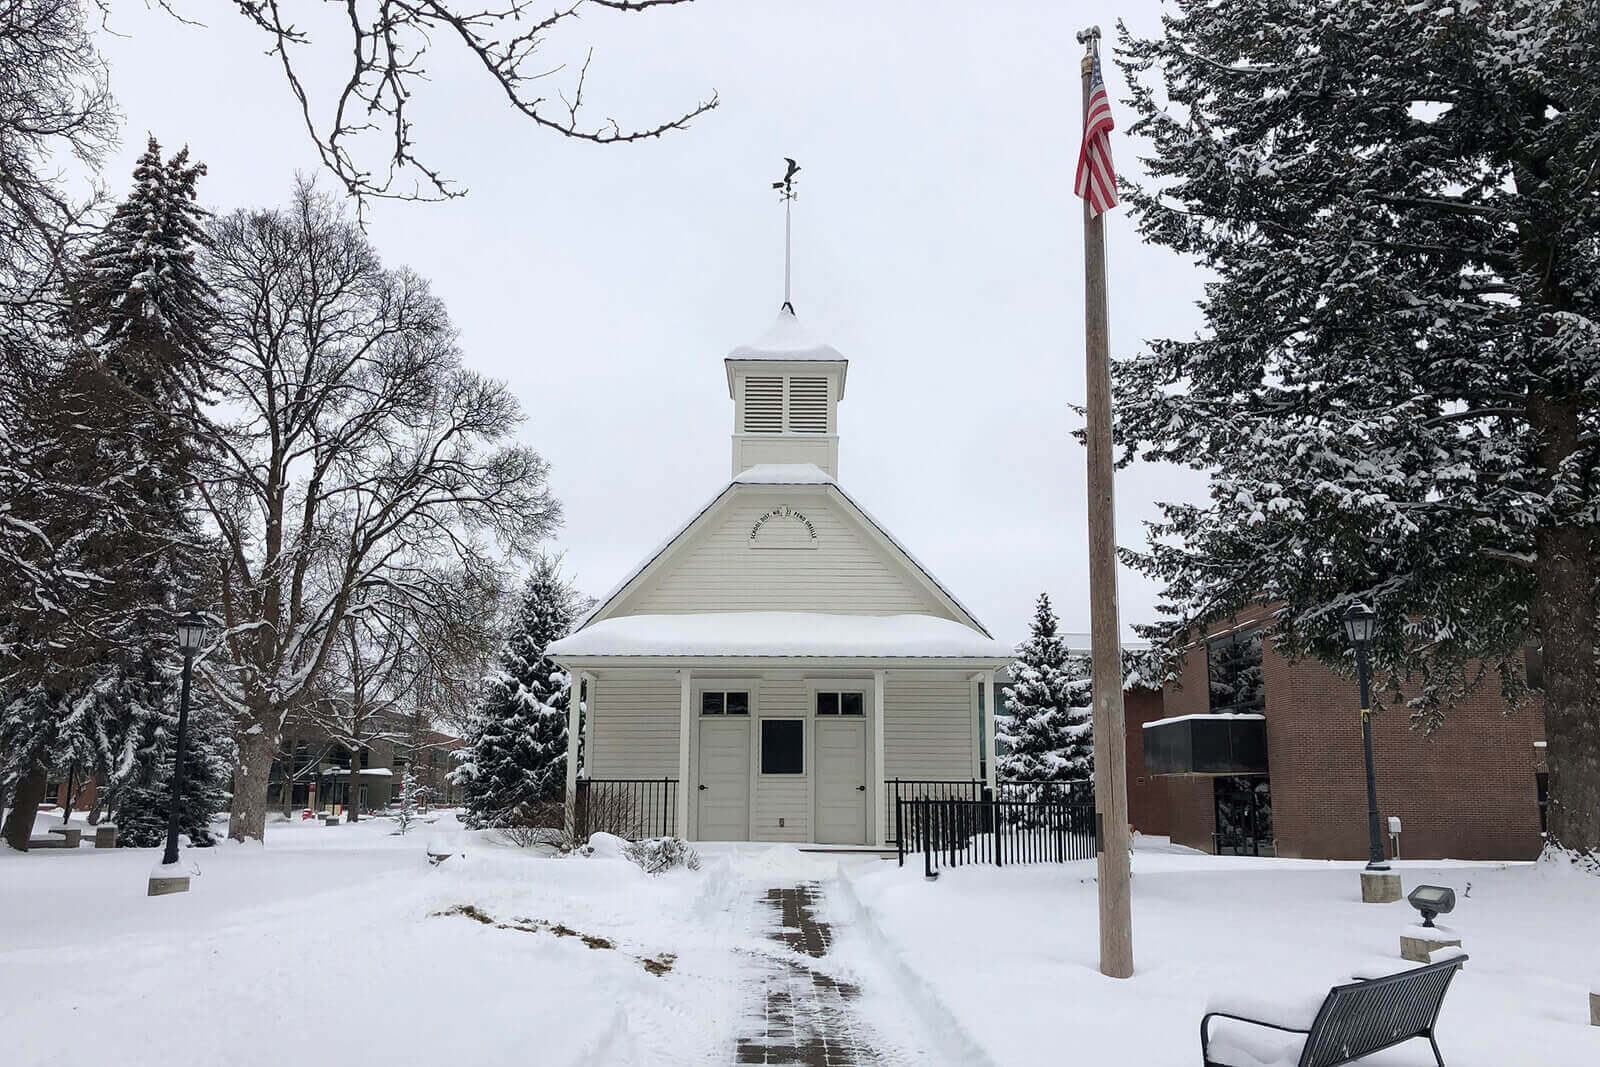 Snowy campus shot of the little school house